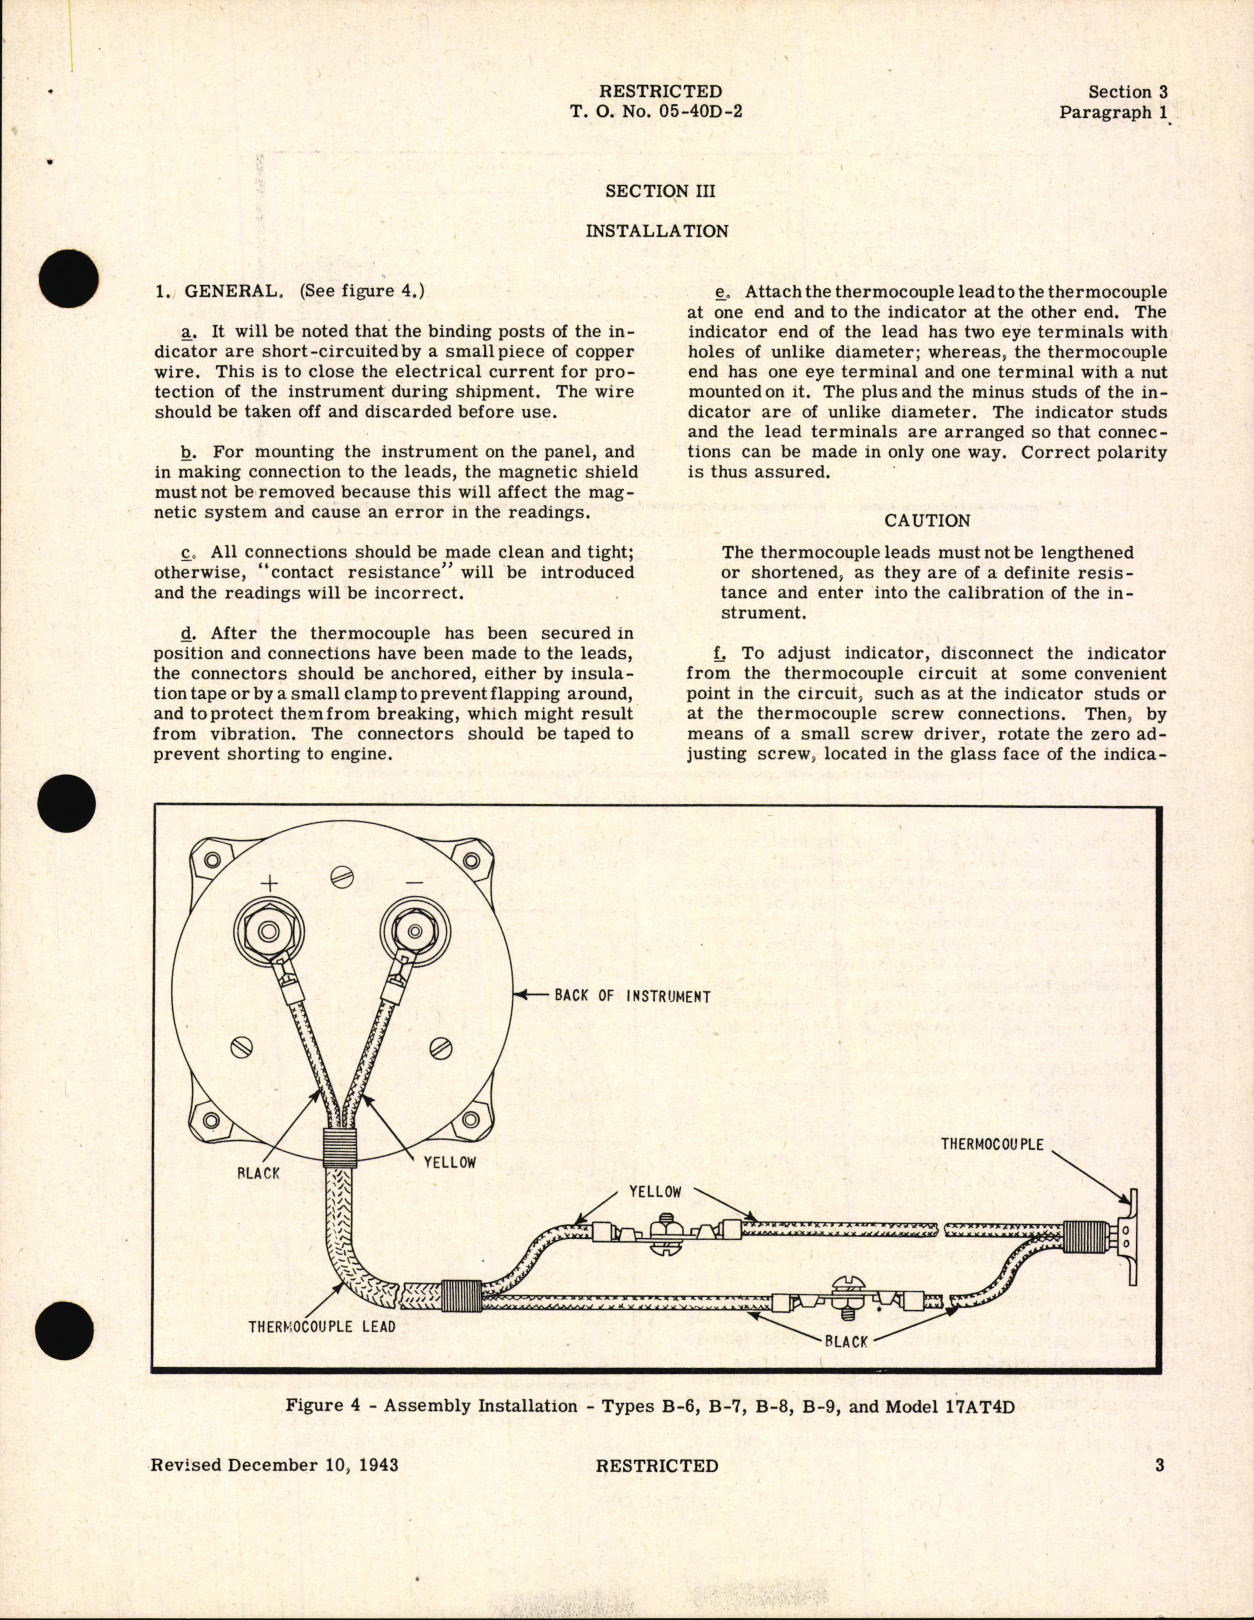 Sample page 7 from AirCorps Library document: Handbook of Instructions with Parts Catalog for Thermocouple Thermometers